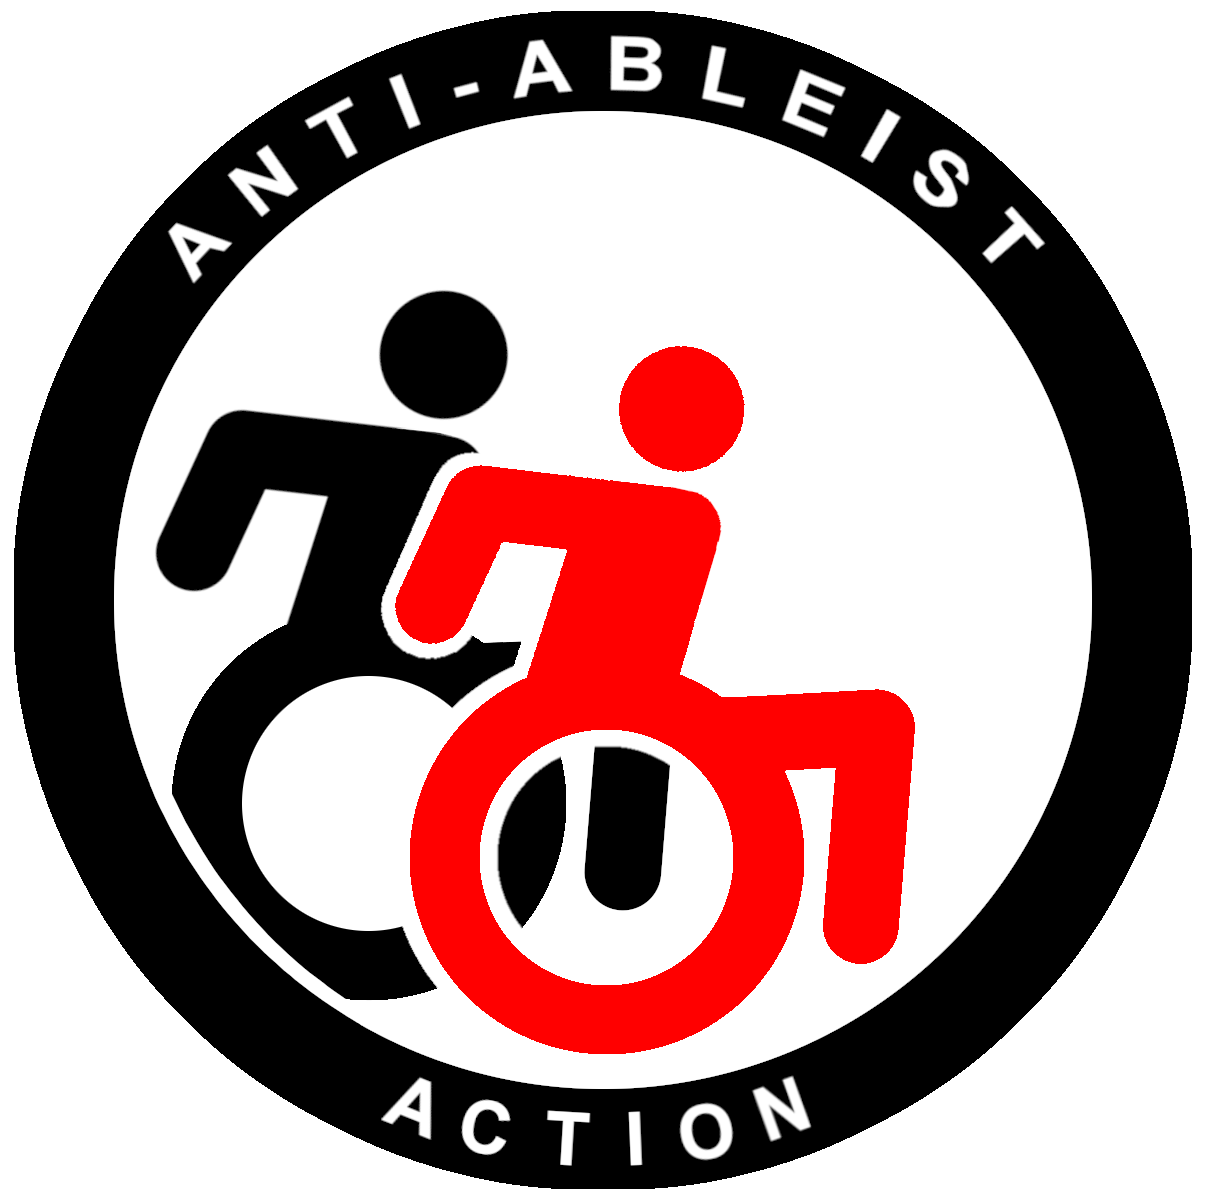 Like Antifa-symbol, round shape, red an black. But ohter Text: anti-ableist-action and with 2 people in a wheelchair instead of the red und black flags